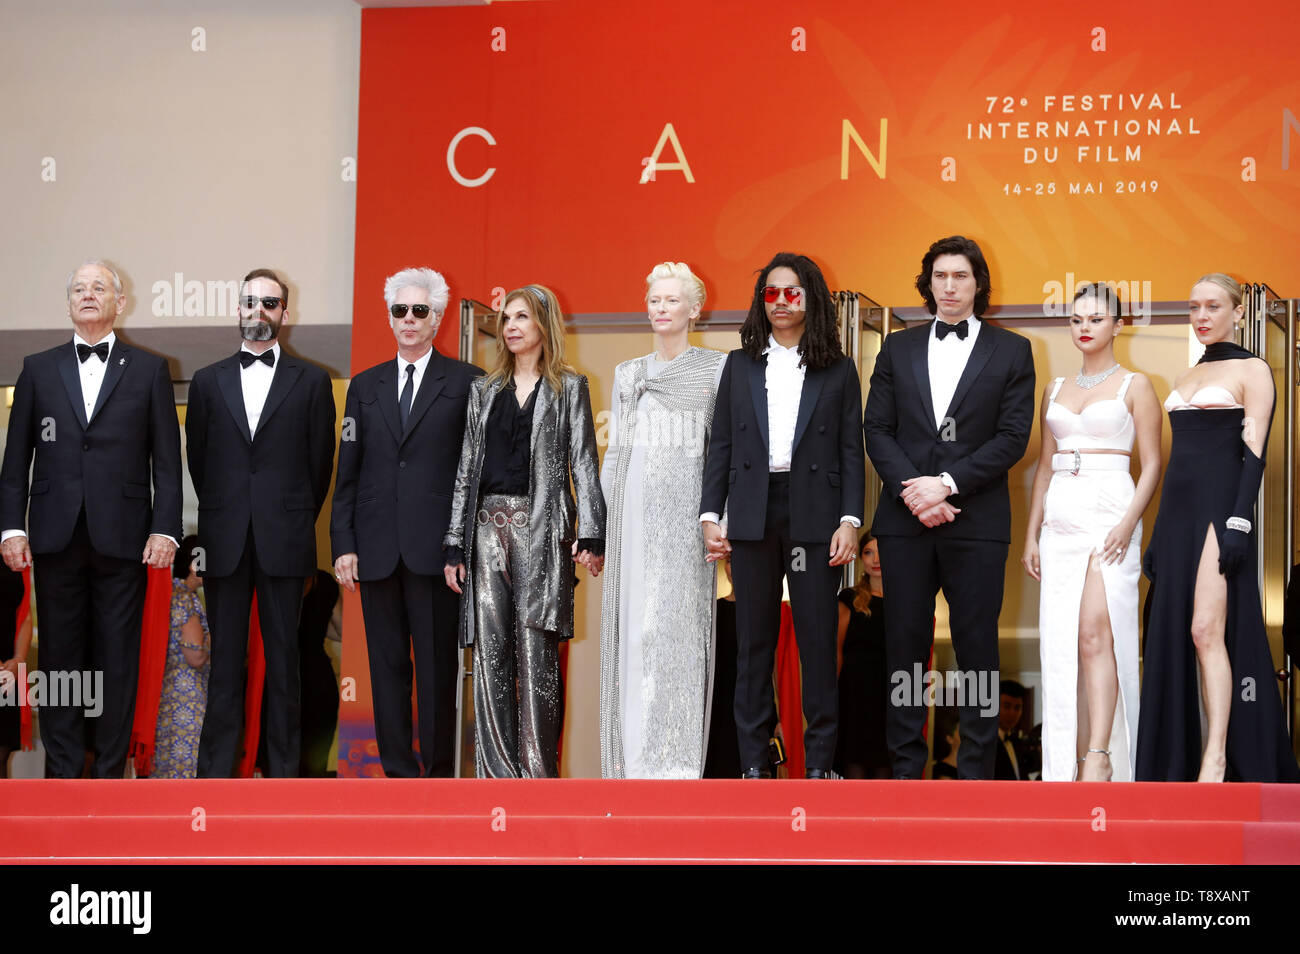 Bill Murray, Carter Logan, Jim Jarmusch, Sara Driver, Tilda Swinton, Luka Sabbat, Adam Driver, Selena Gomez and Chloe Sevigny attending the opening ceremony and screening of 'The Dead Don't Die' during the 72nd Cannes Film Festival at the Palais des Festivals on May 14, 2019 in Cannes, France | usage worldwide Stock Photo